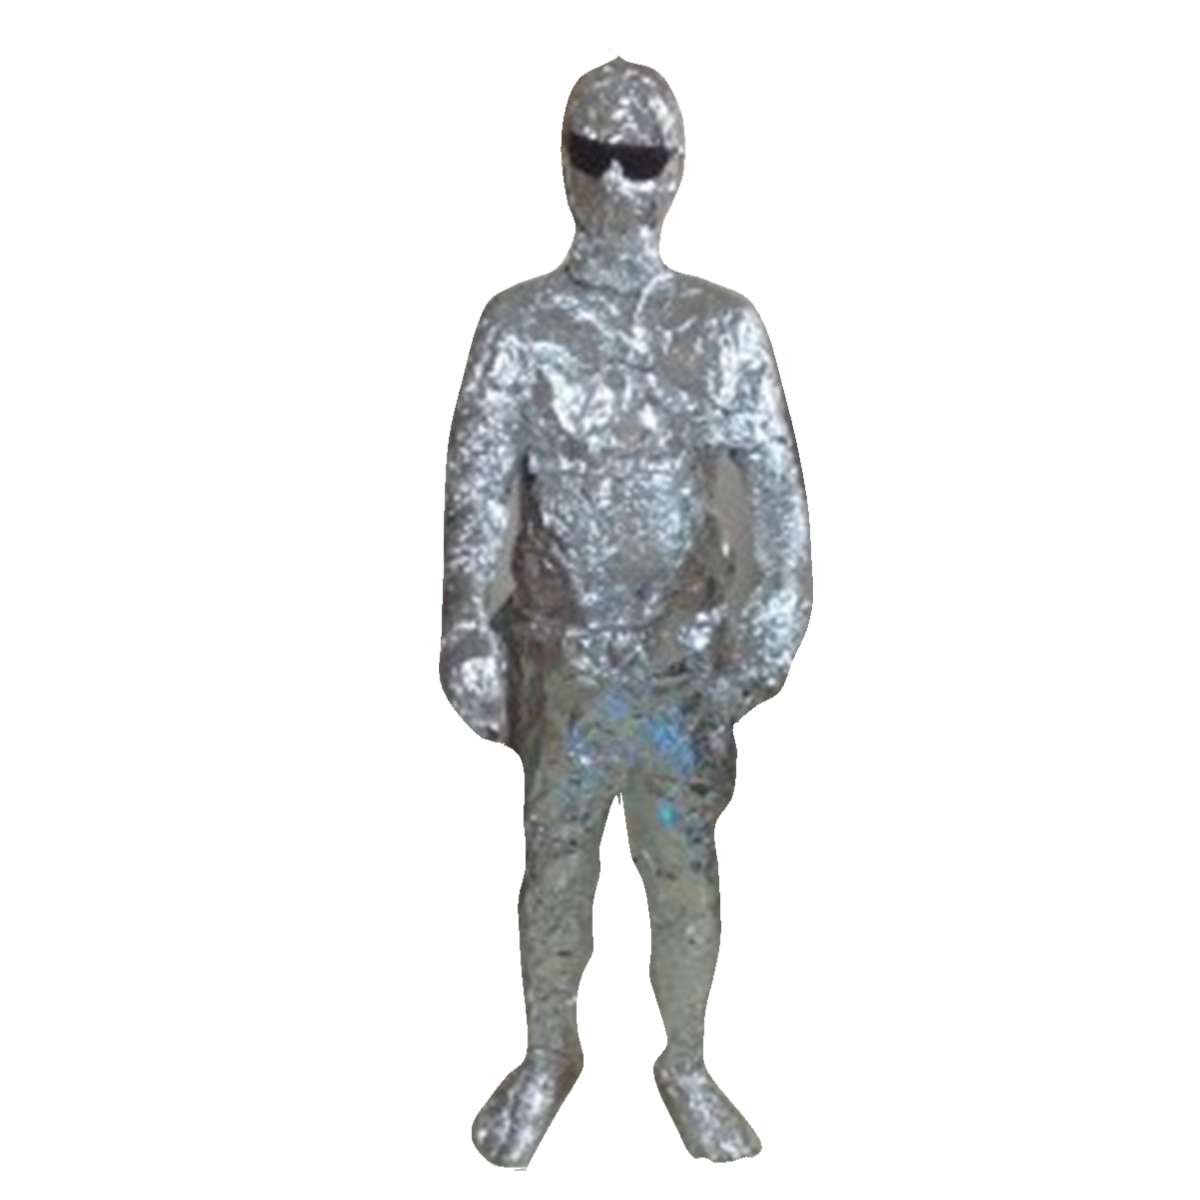 Tinfoil-Suit-cropped.jpg